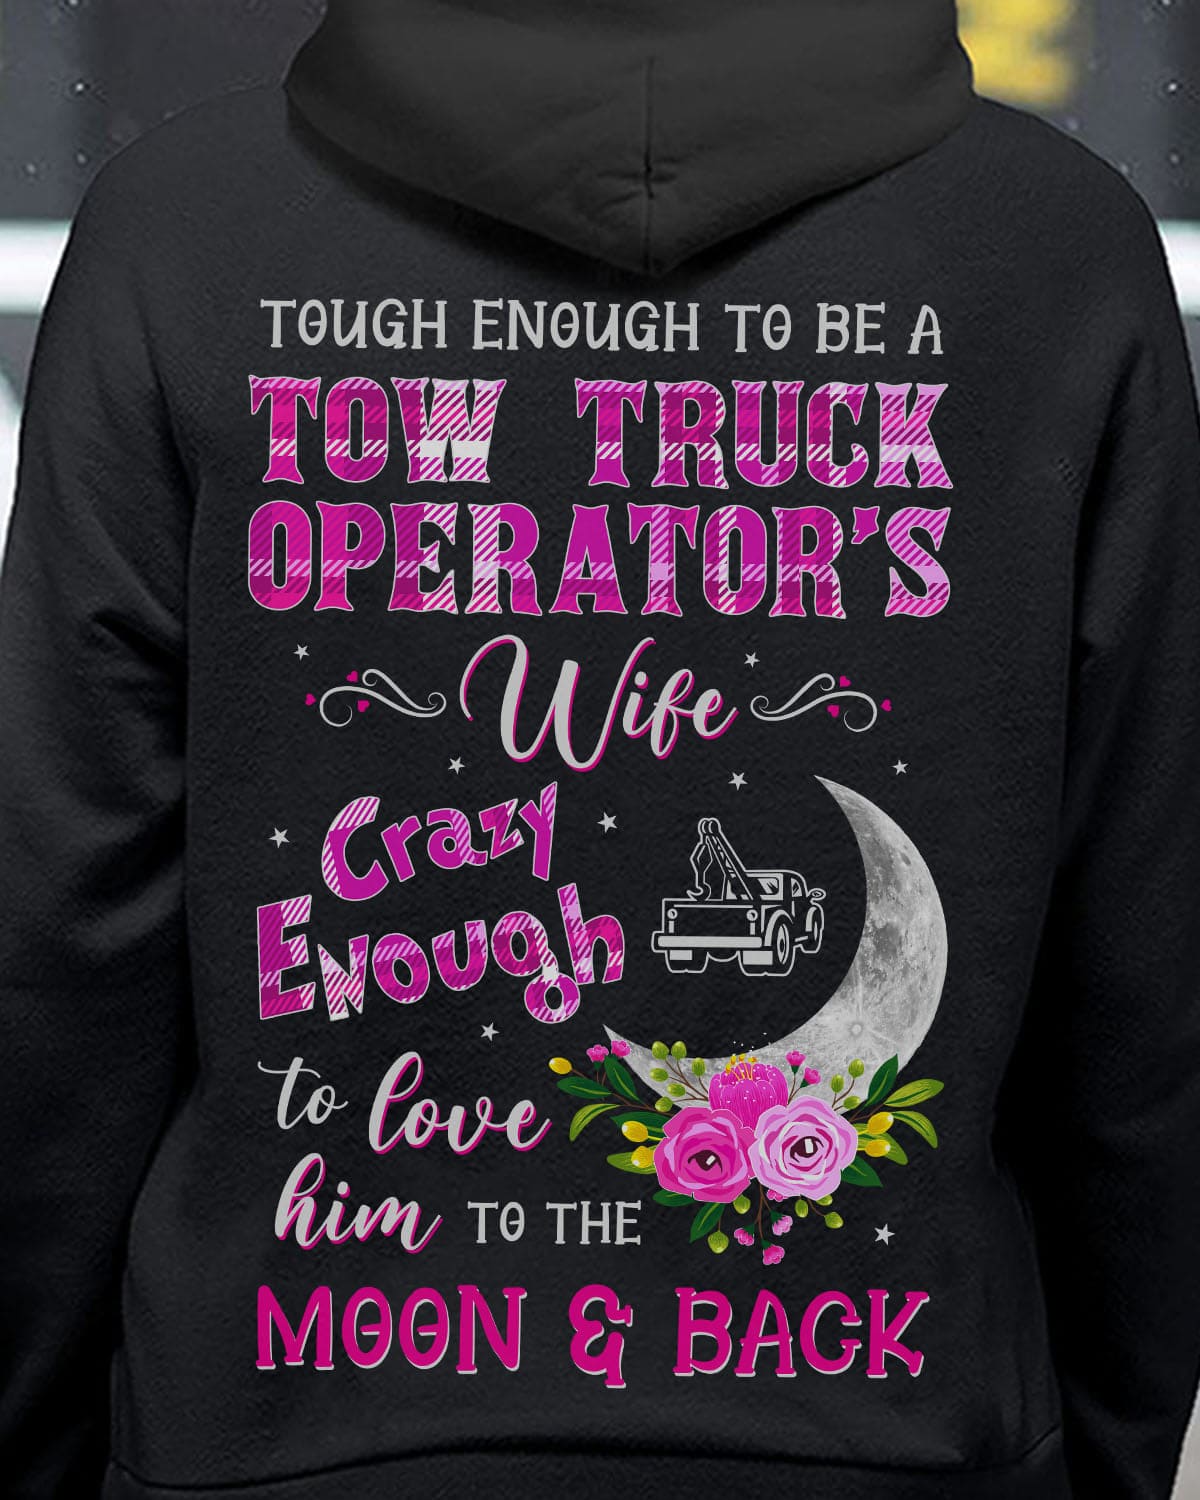 Tough enough to be a tow truck operator's wife crazy enough to love him to the moon and back